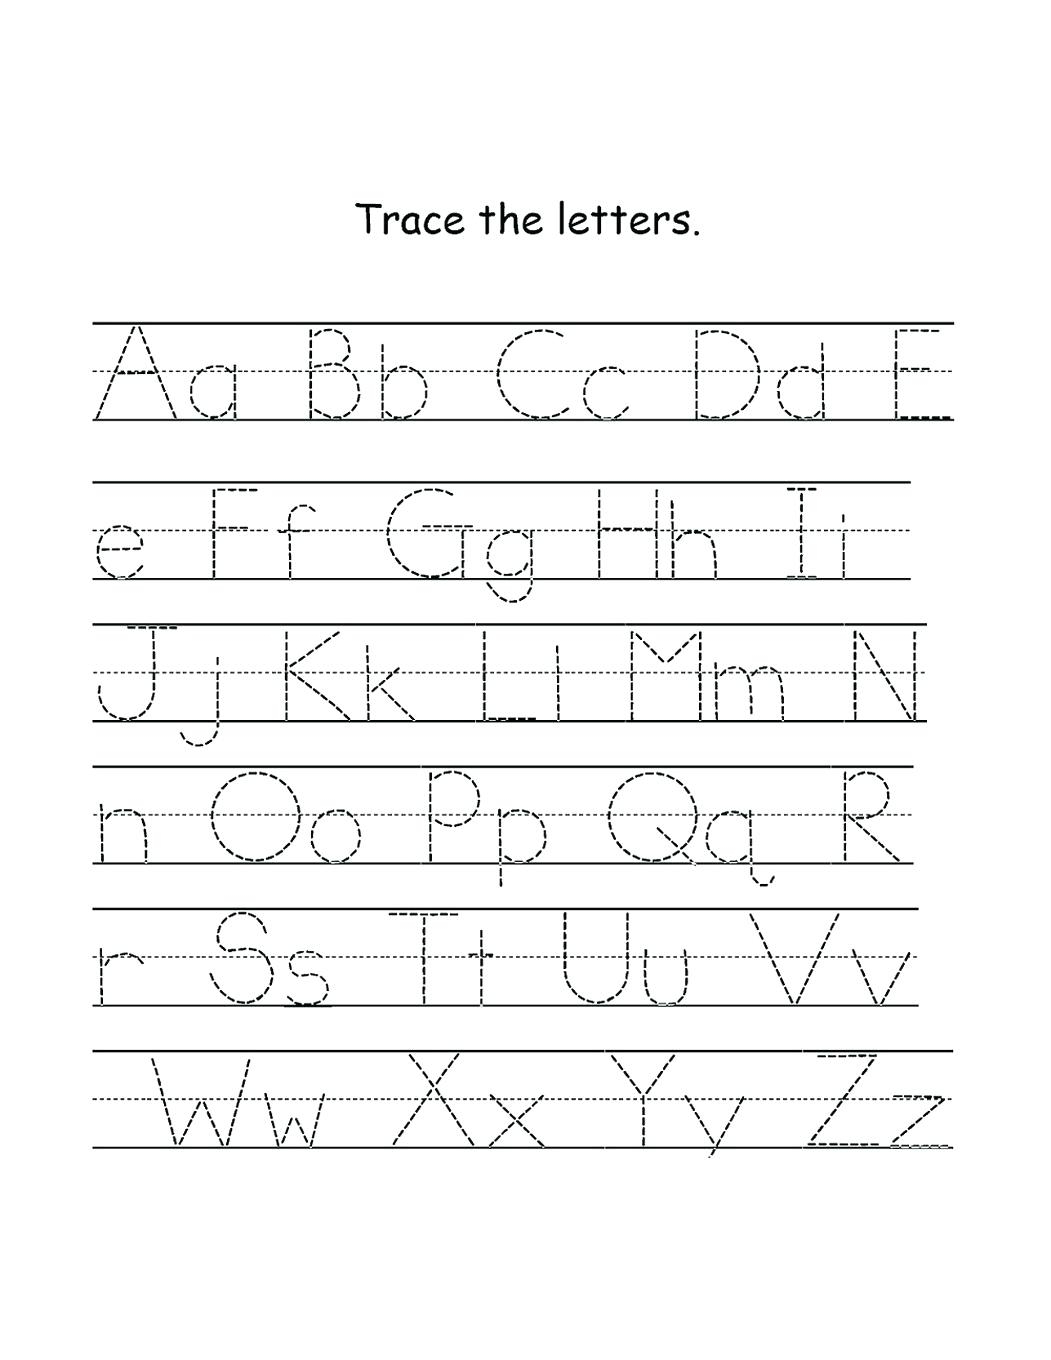 Basic Tracing Worksheets Tracing Letters A Z Worksheets Easy for Tracing Letters Az Worksheets